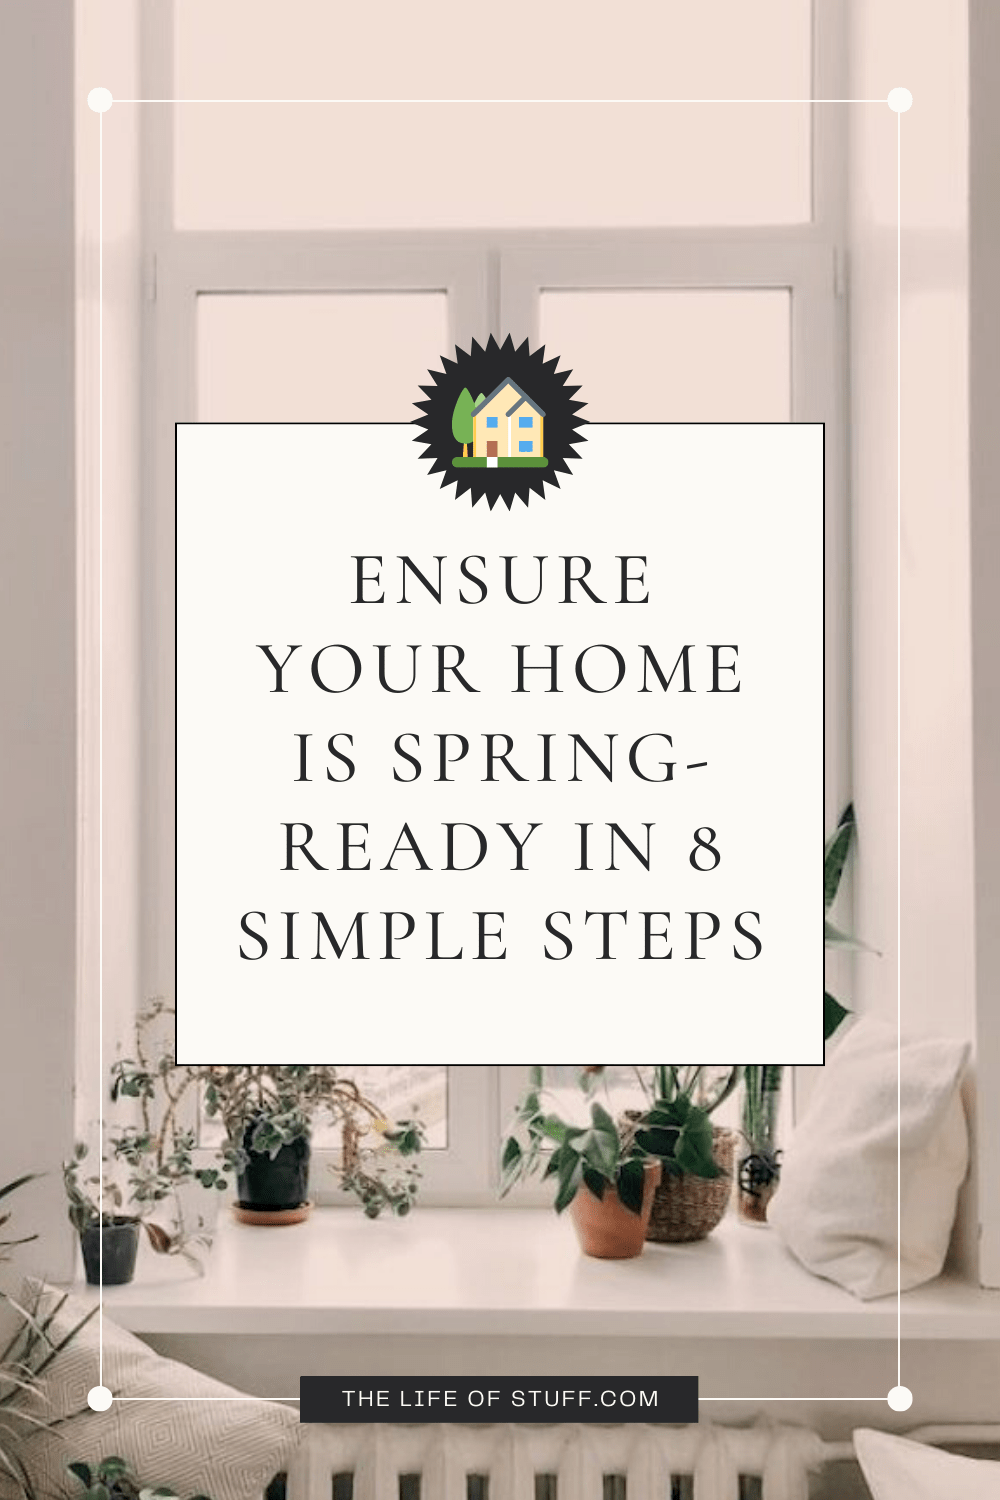 Ensure Your Home is Spring-Ready in 8 Simple Steps - The Life of Stuff